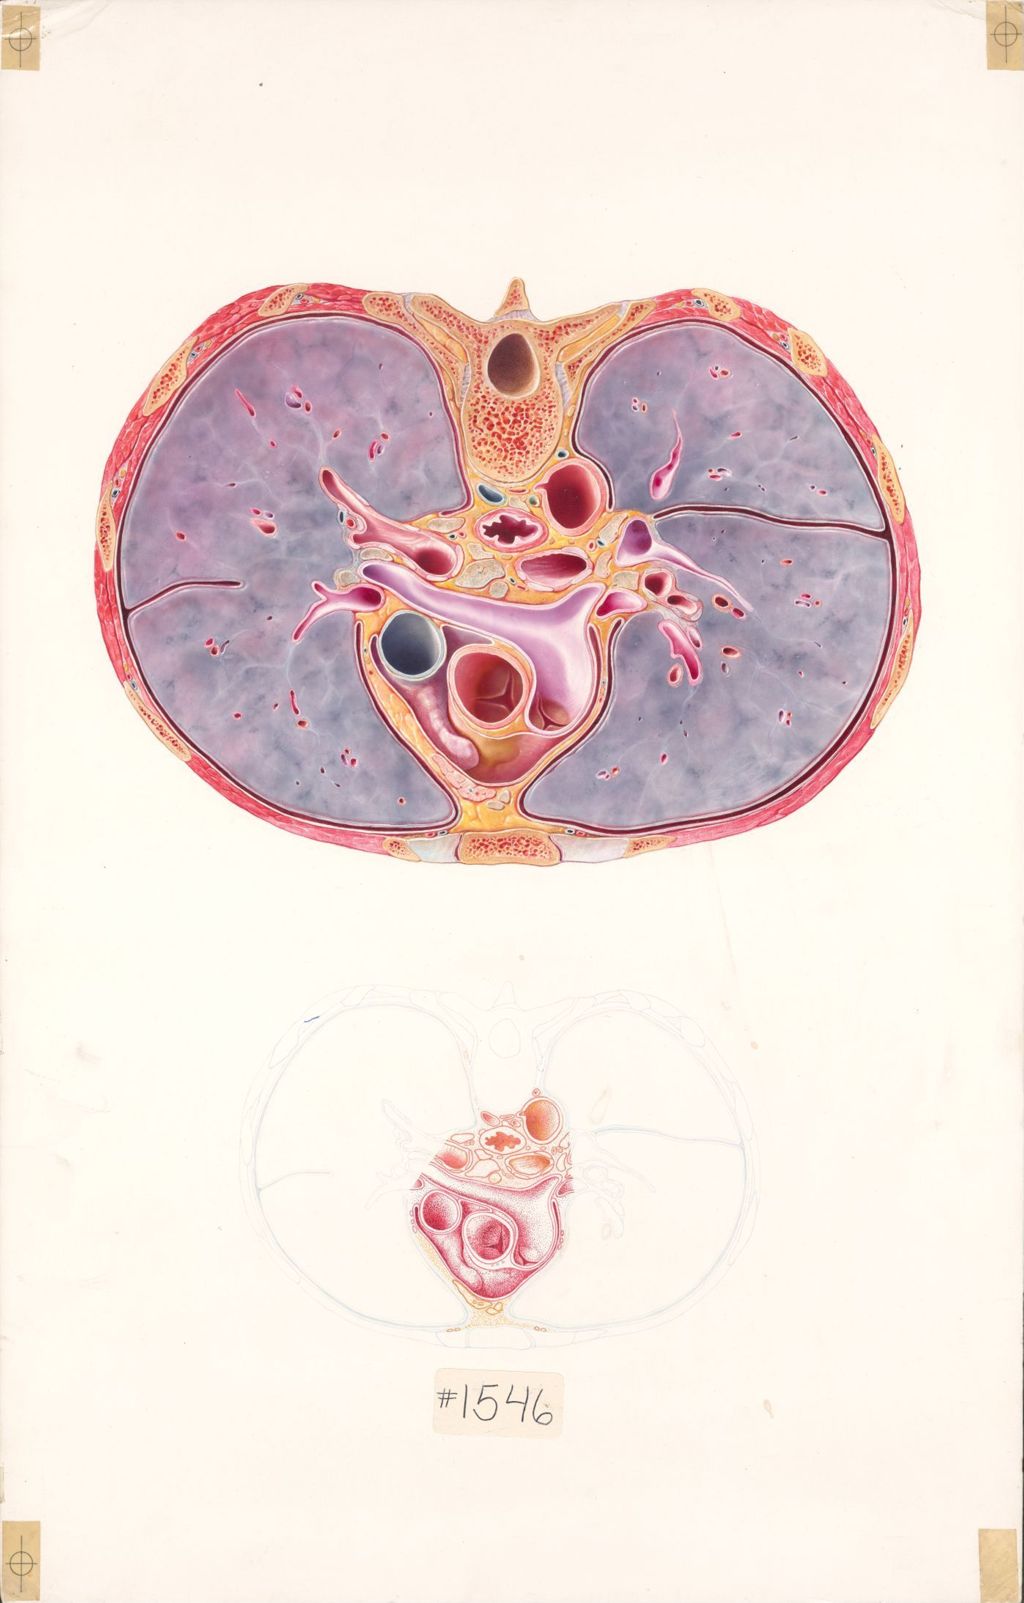 The Anatomical Disposition of the Thorax, The Mediastinum, Plate II, Horizontal Section Through the Mediastinum